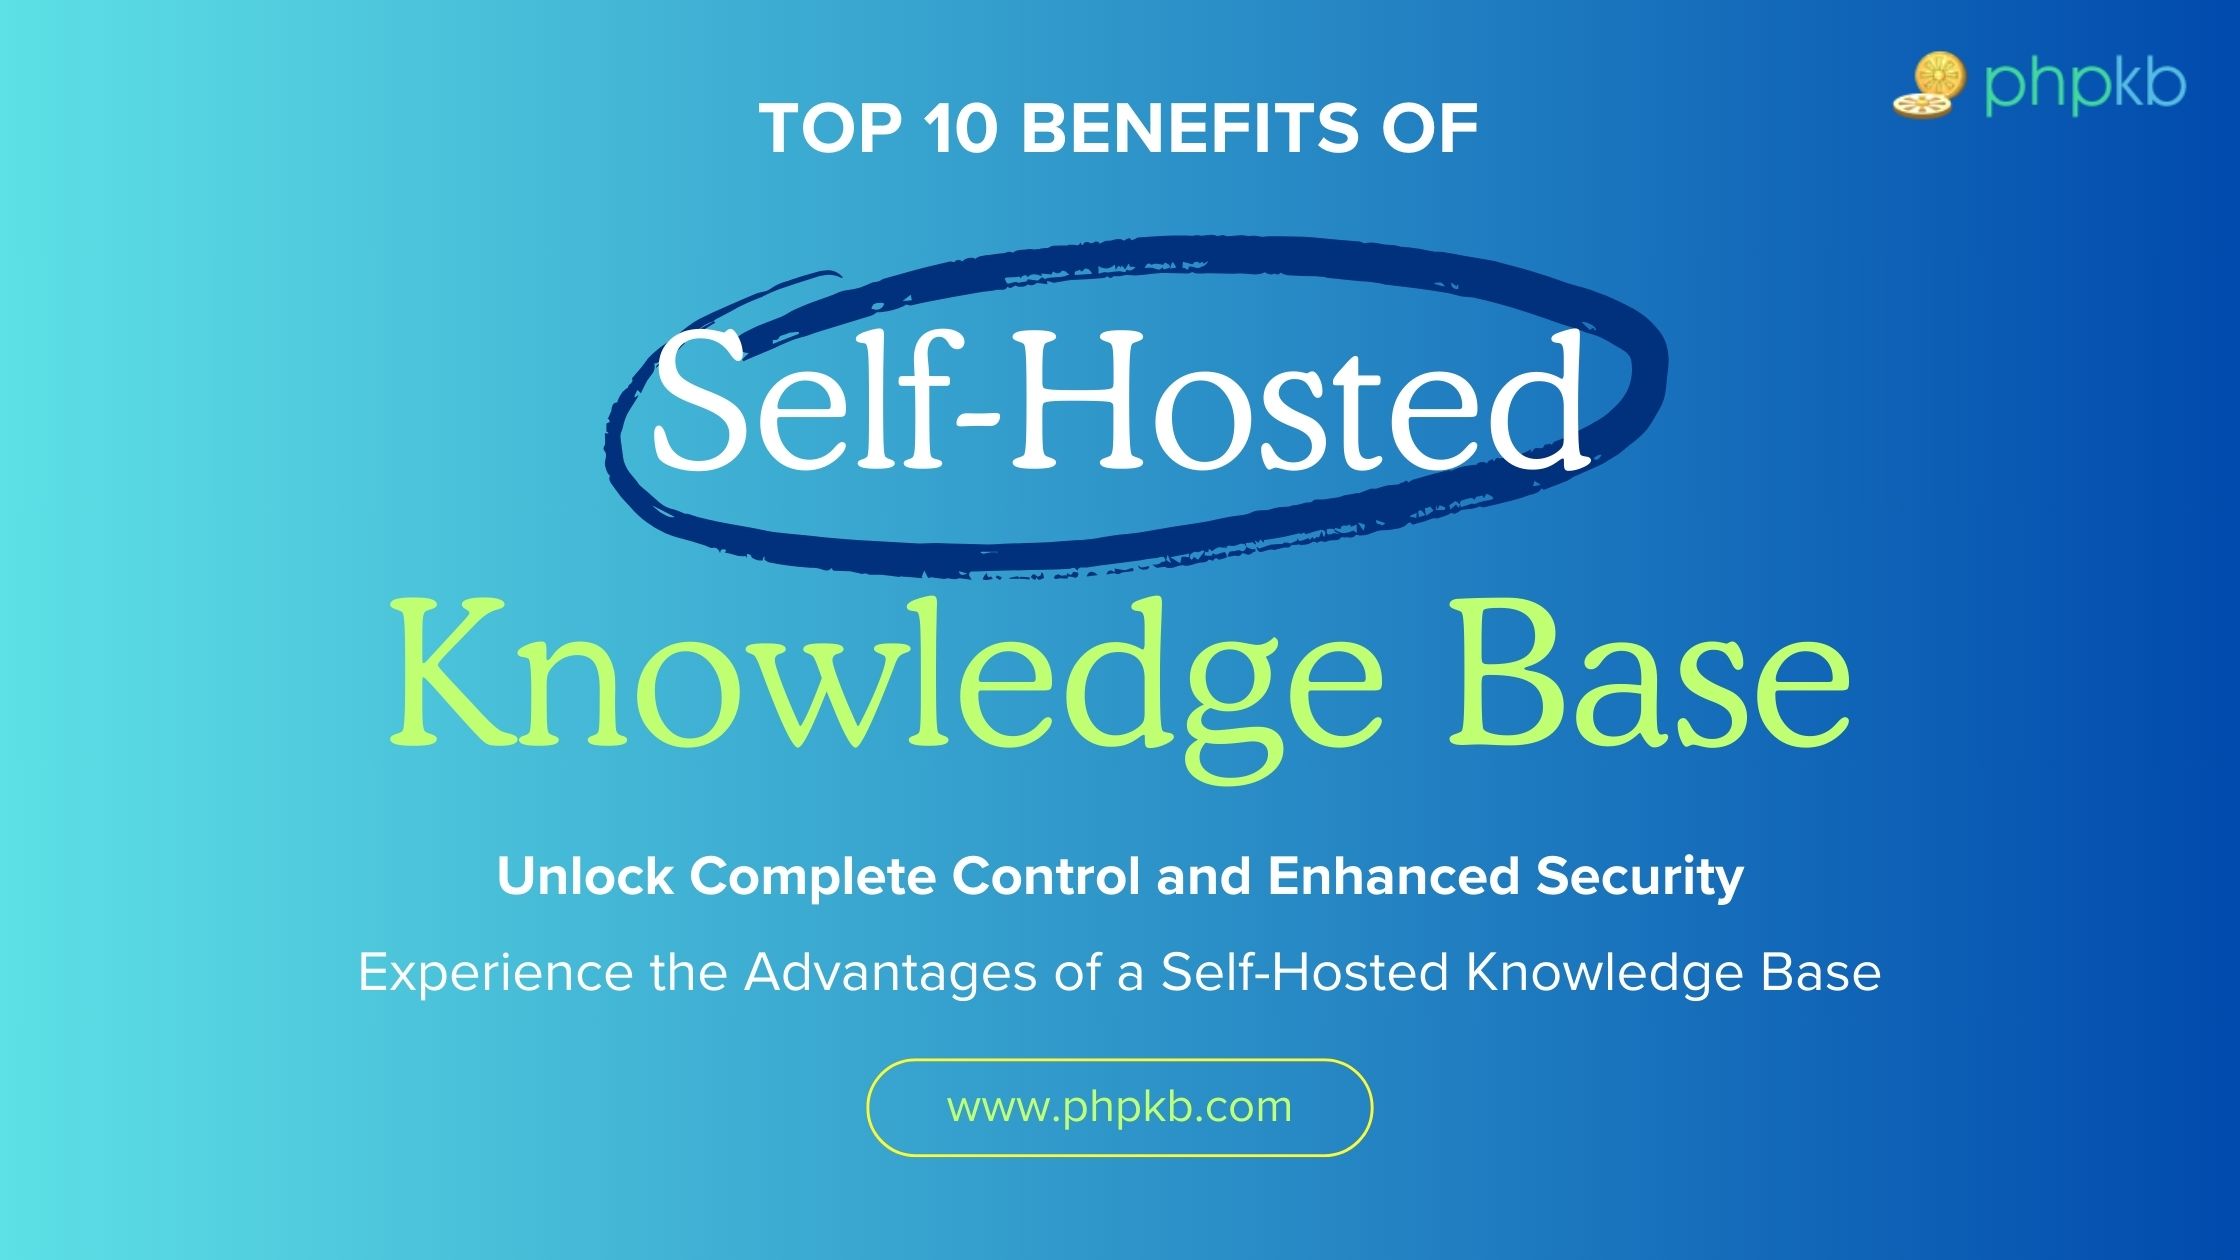 Self-Hosted Knowledge Base